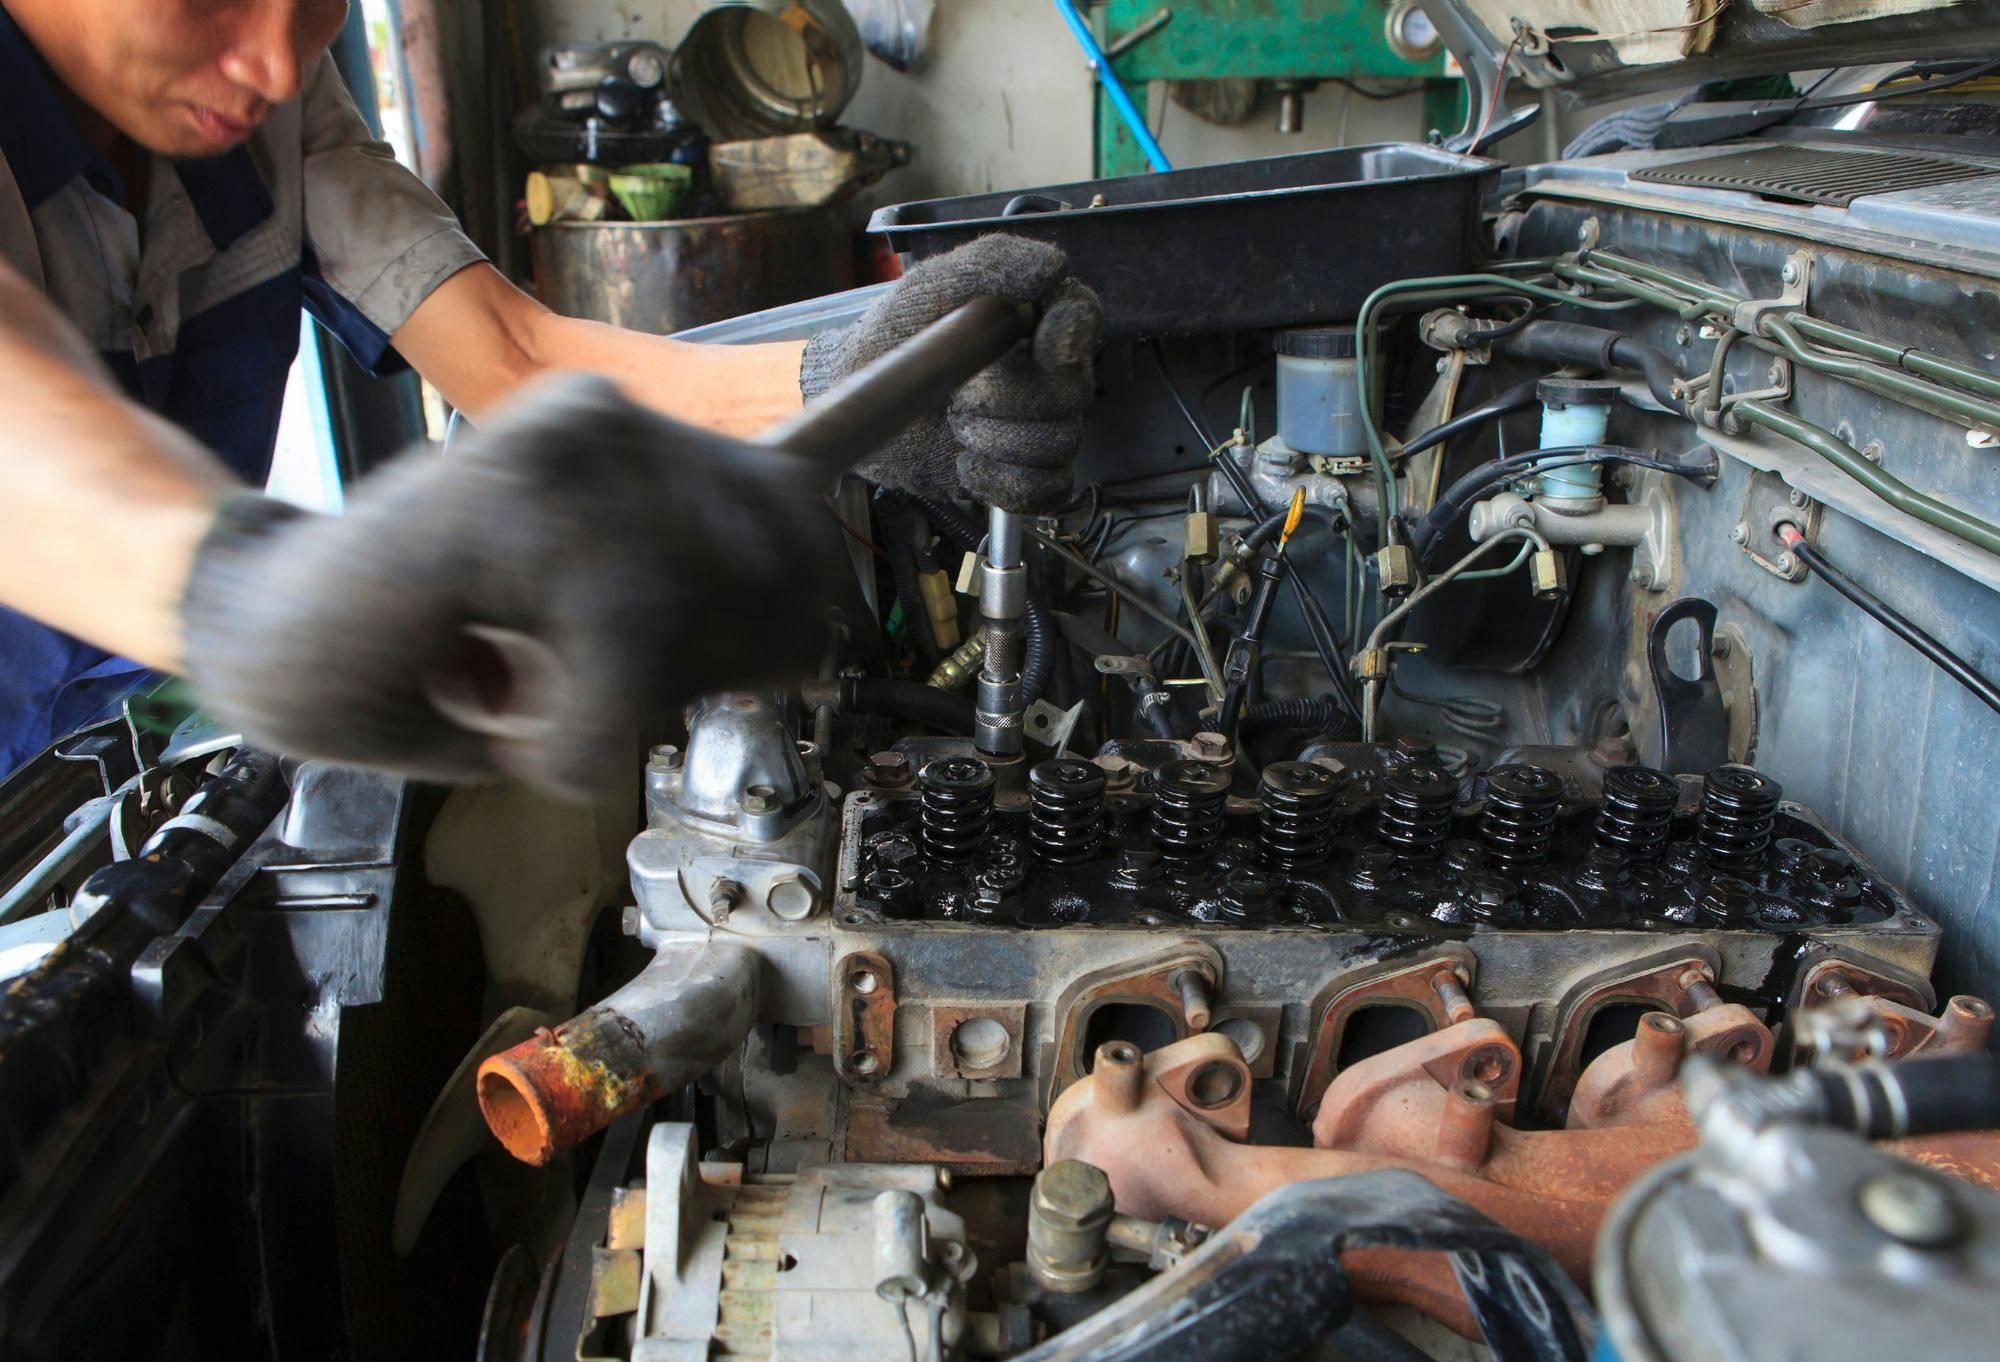 Explore key factors like cost, scope of damage, value retention, and more, in deciding whether to repair or rebuild your truck's engine.